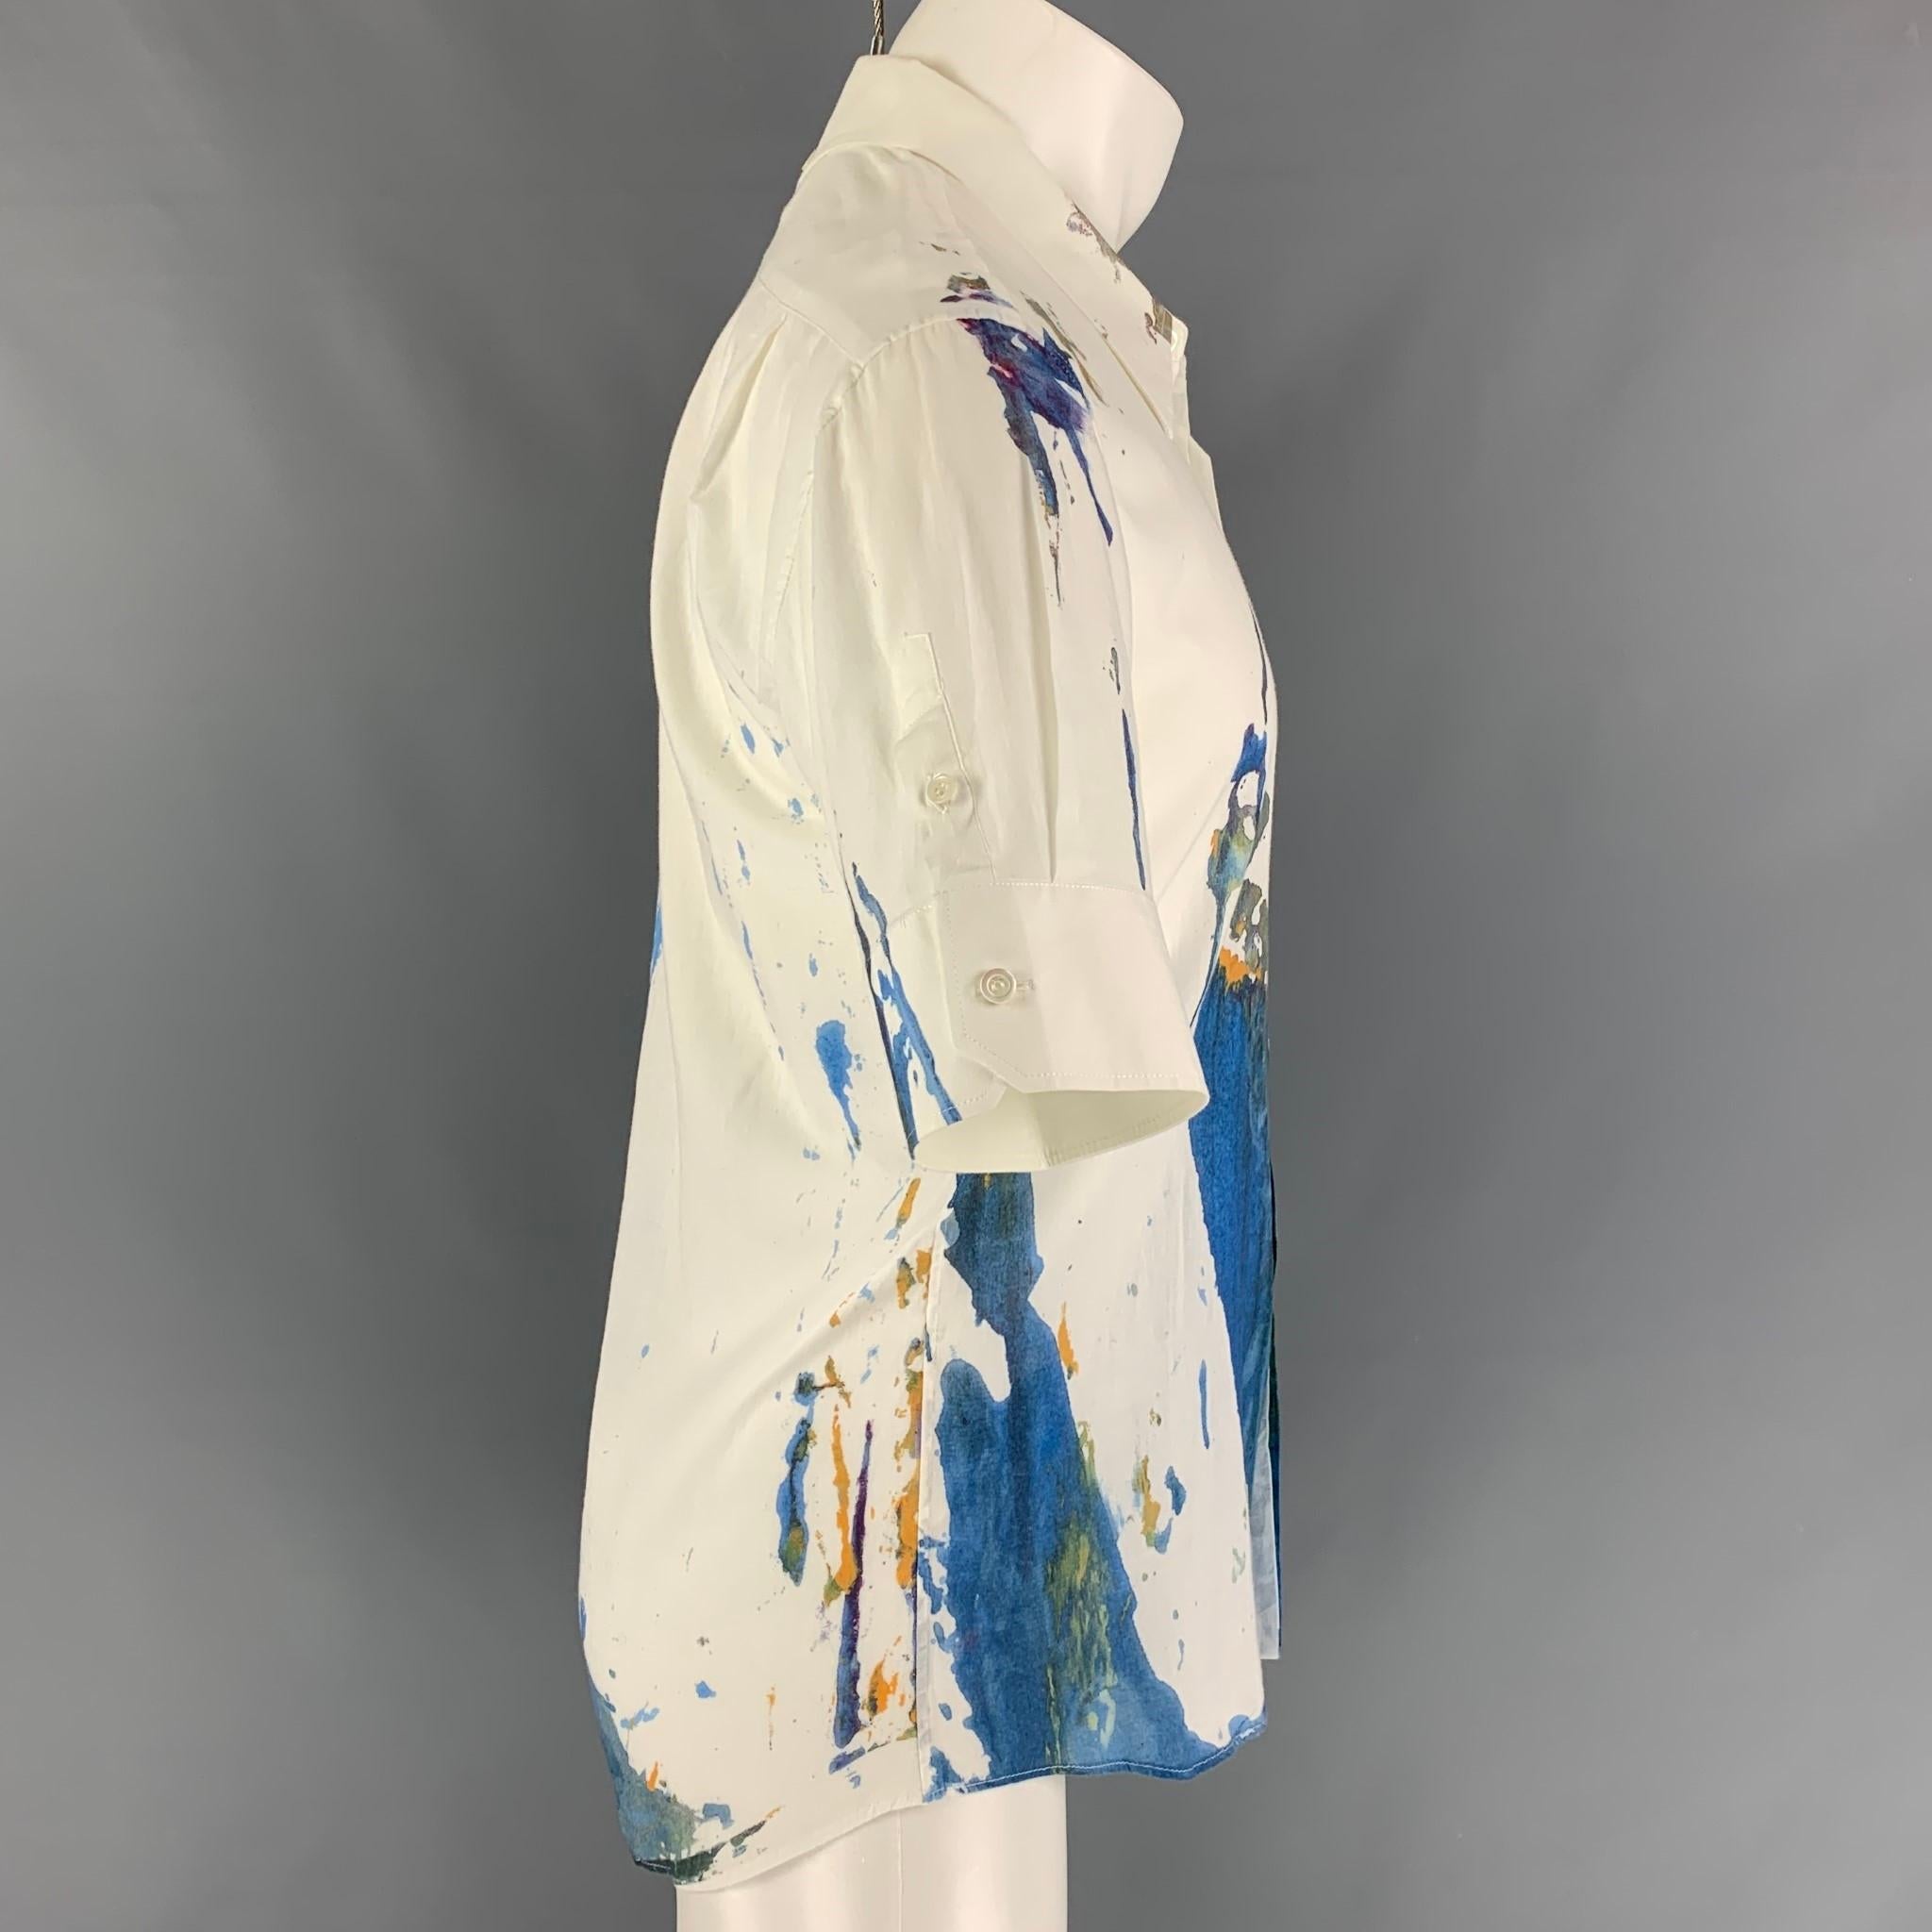 ALEXANDER McQUEEN short sleeve shirt comes in a white & blue splattered cotton featuring a front pocket, spread collar, and a hidden placket closure. Made in Italy. 

Very Good Pre-Owned Condition.
Marked: 48
Original Retail Price: